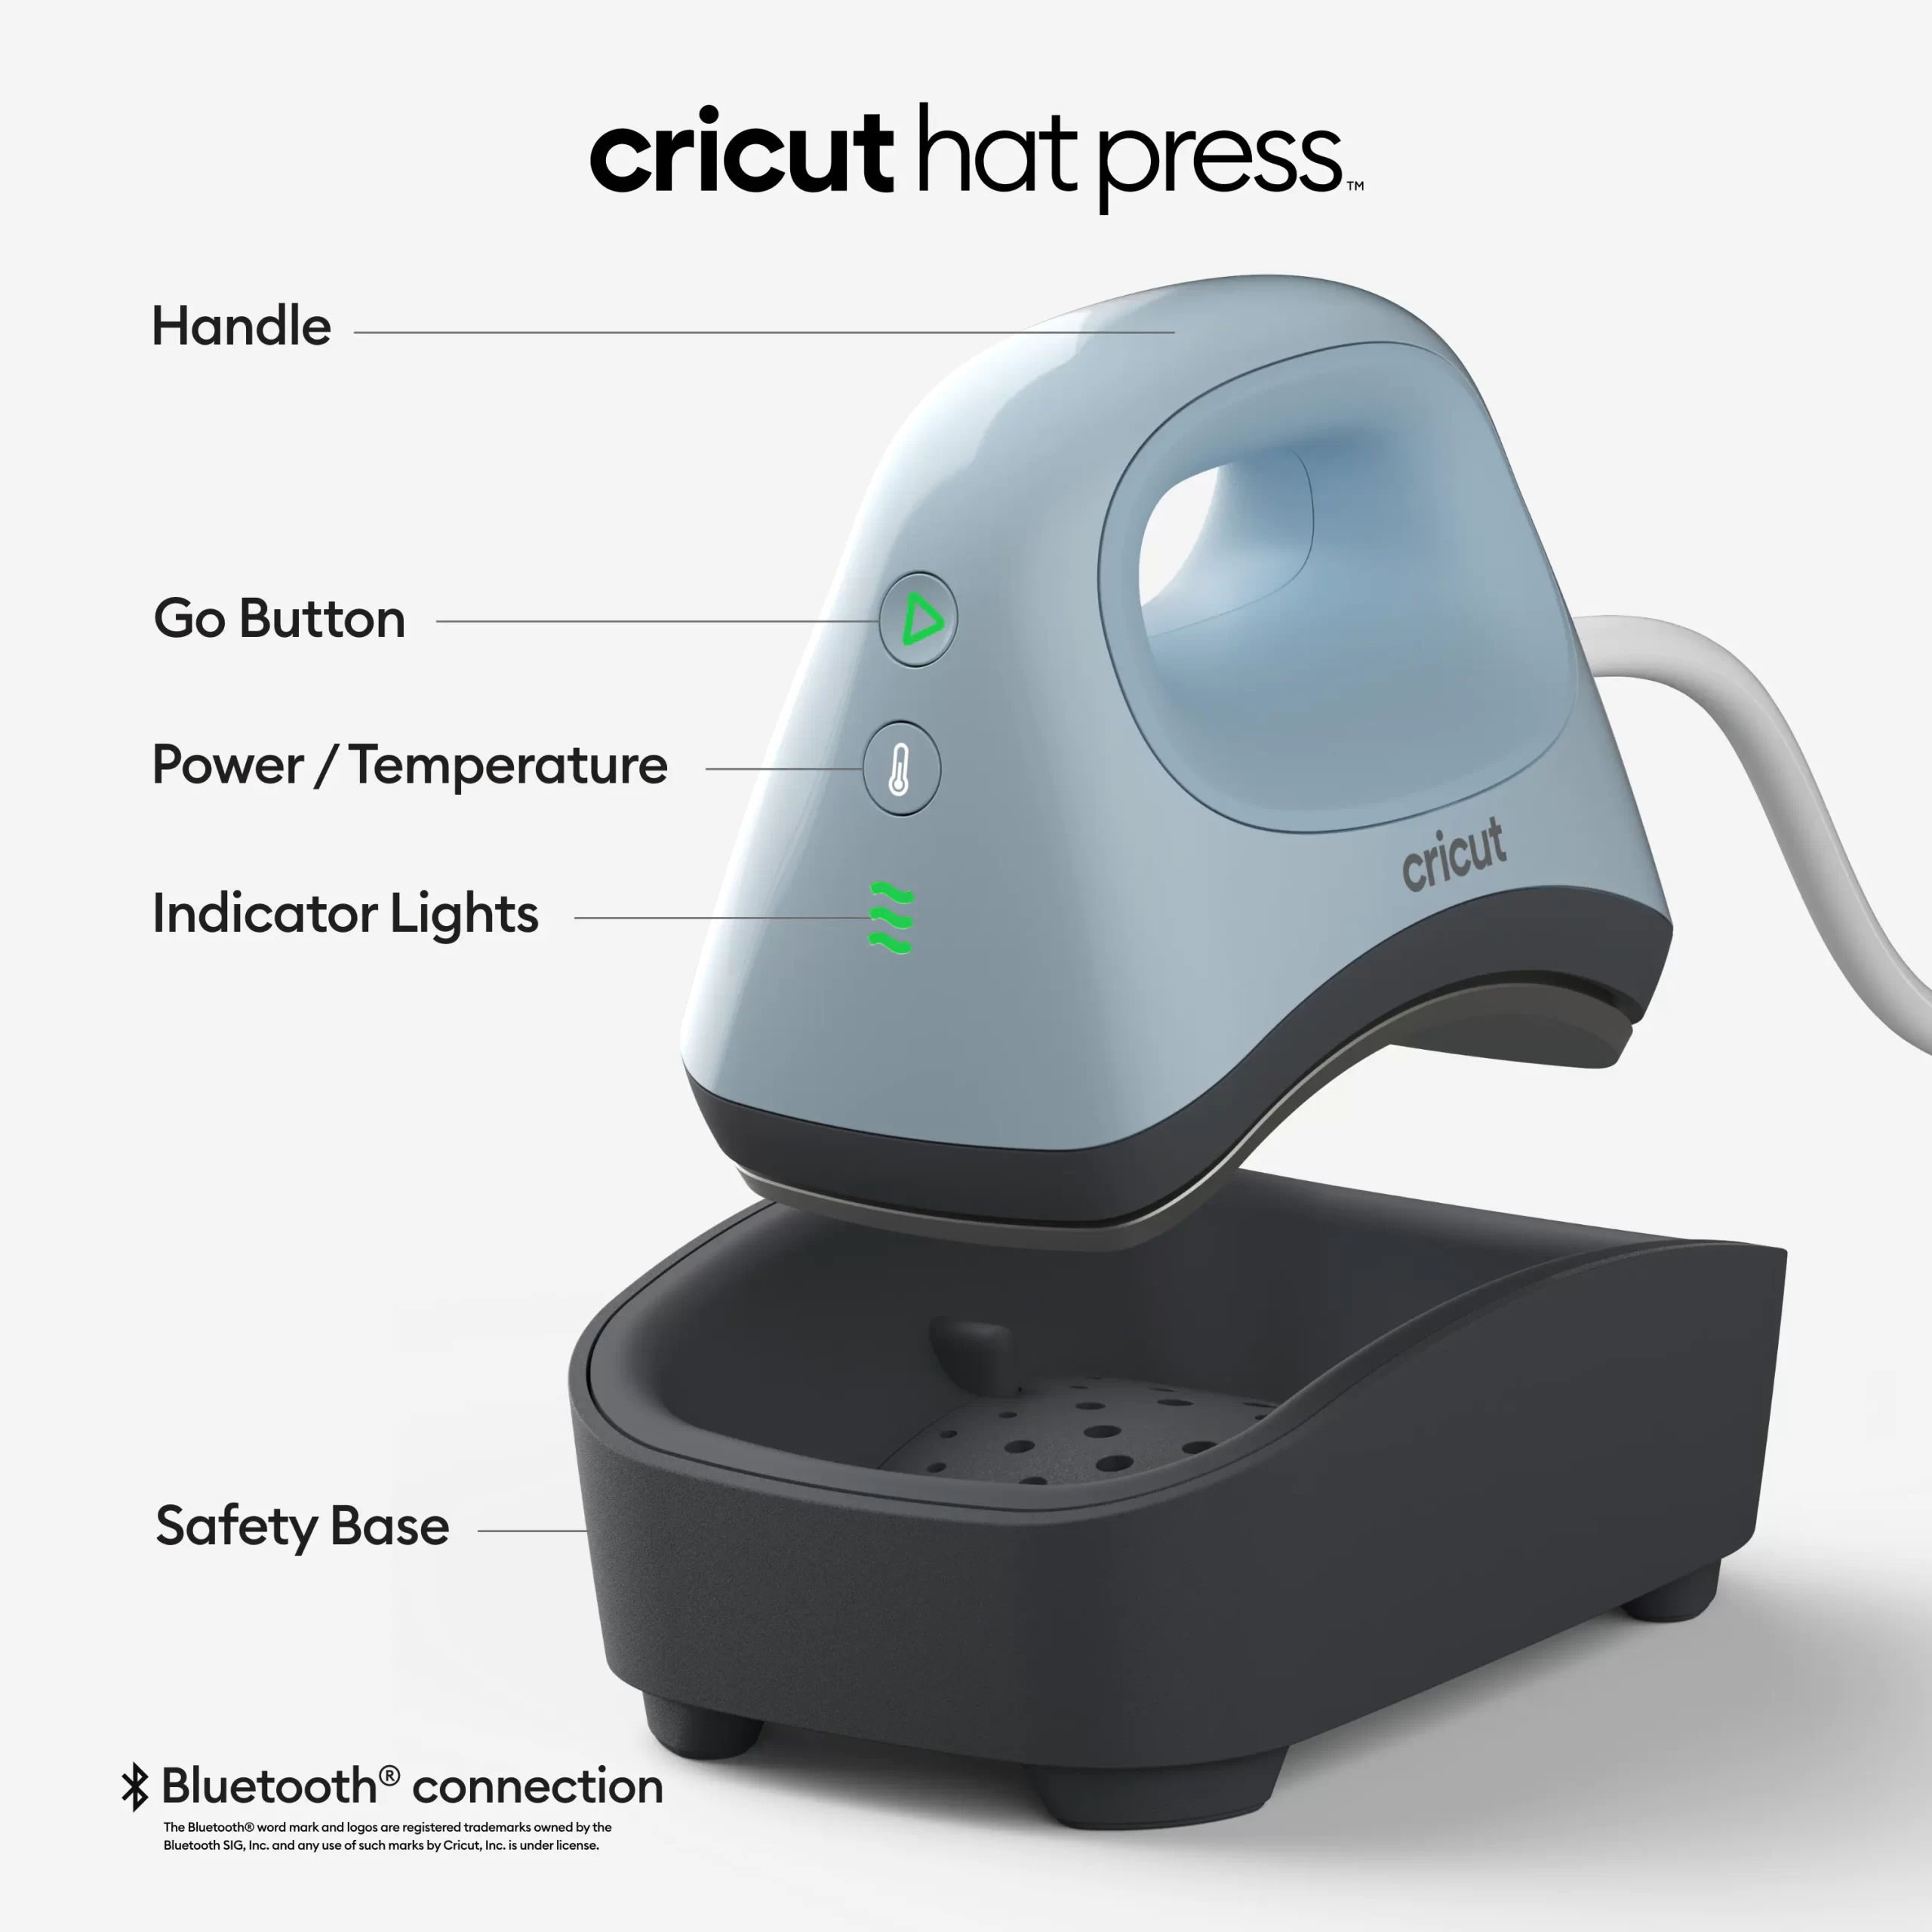 Cricut Hat Press Smart Heat Press Machine for Hats with Built-in Bluetooth， Connects to Cricut Heat App， Curved， Ceramic-Coated Heat Plate， Easy Temperature Control with Safety Base and Auto-Off Feature